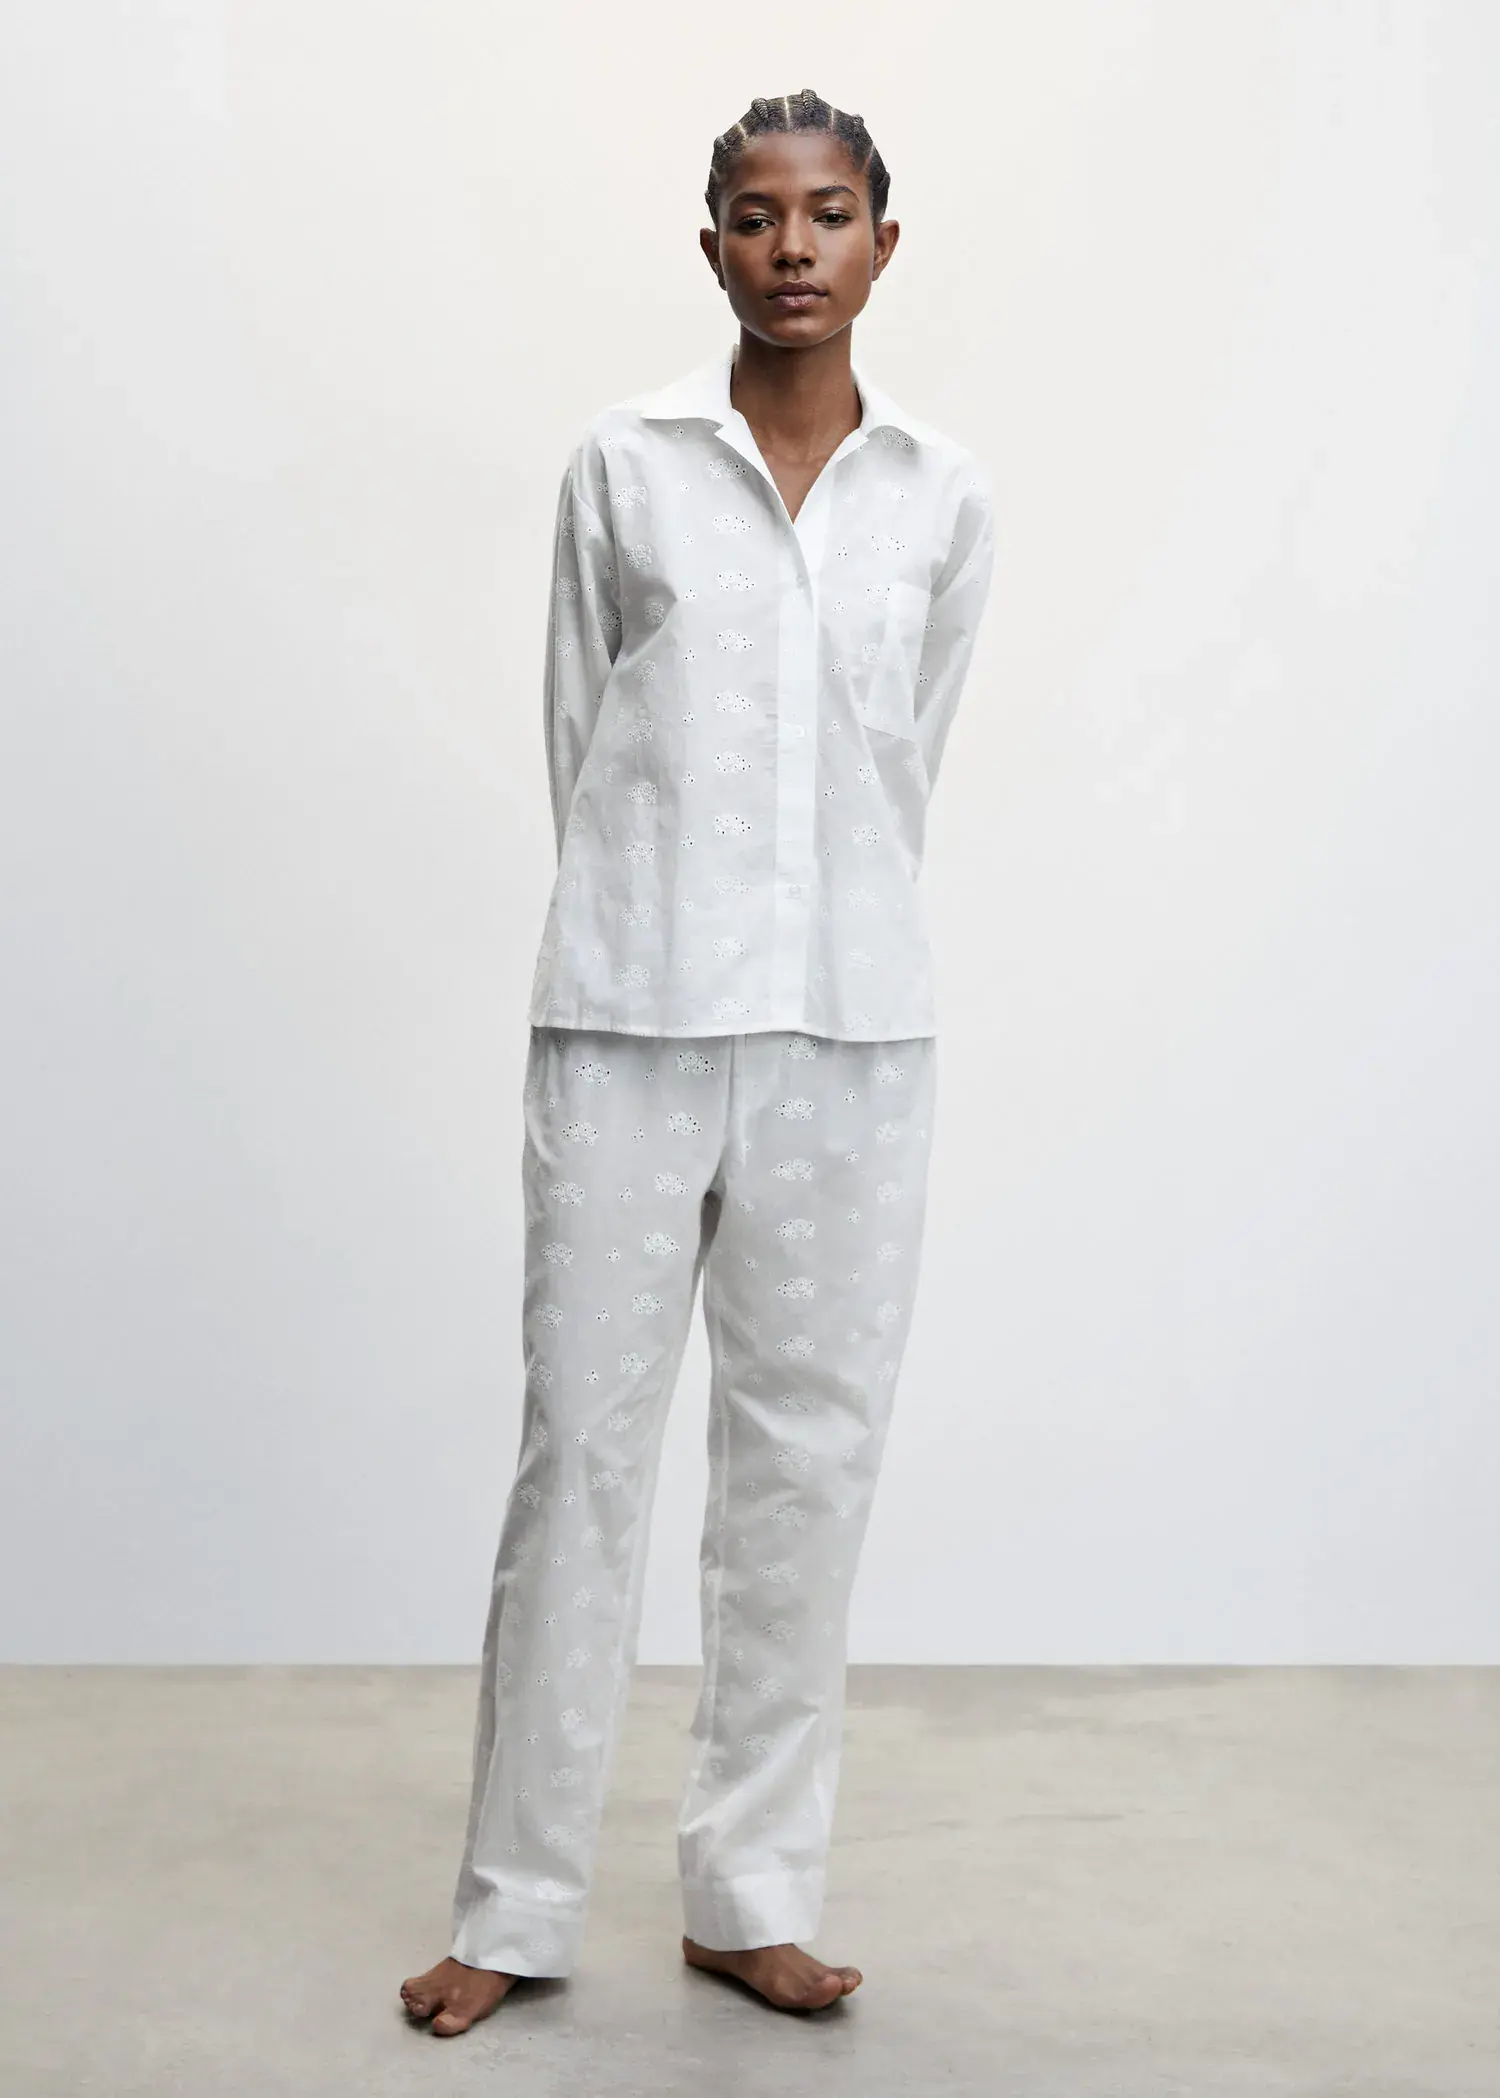 Mango Pajama pants with openwork details. a person standing in a room wearing a white outfit. 